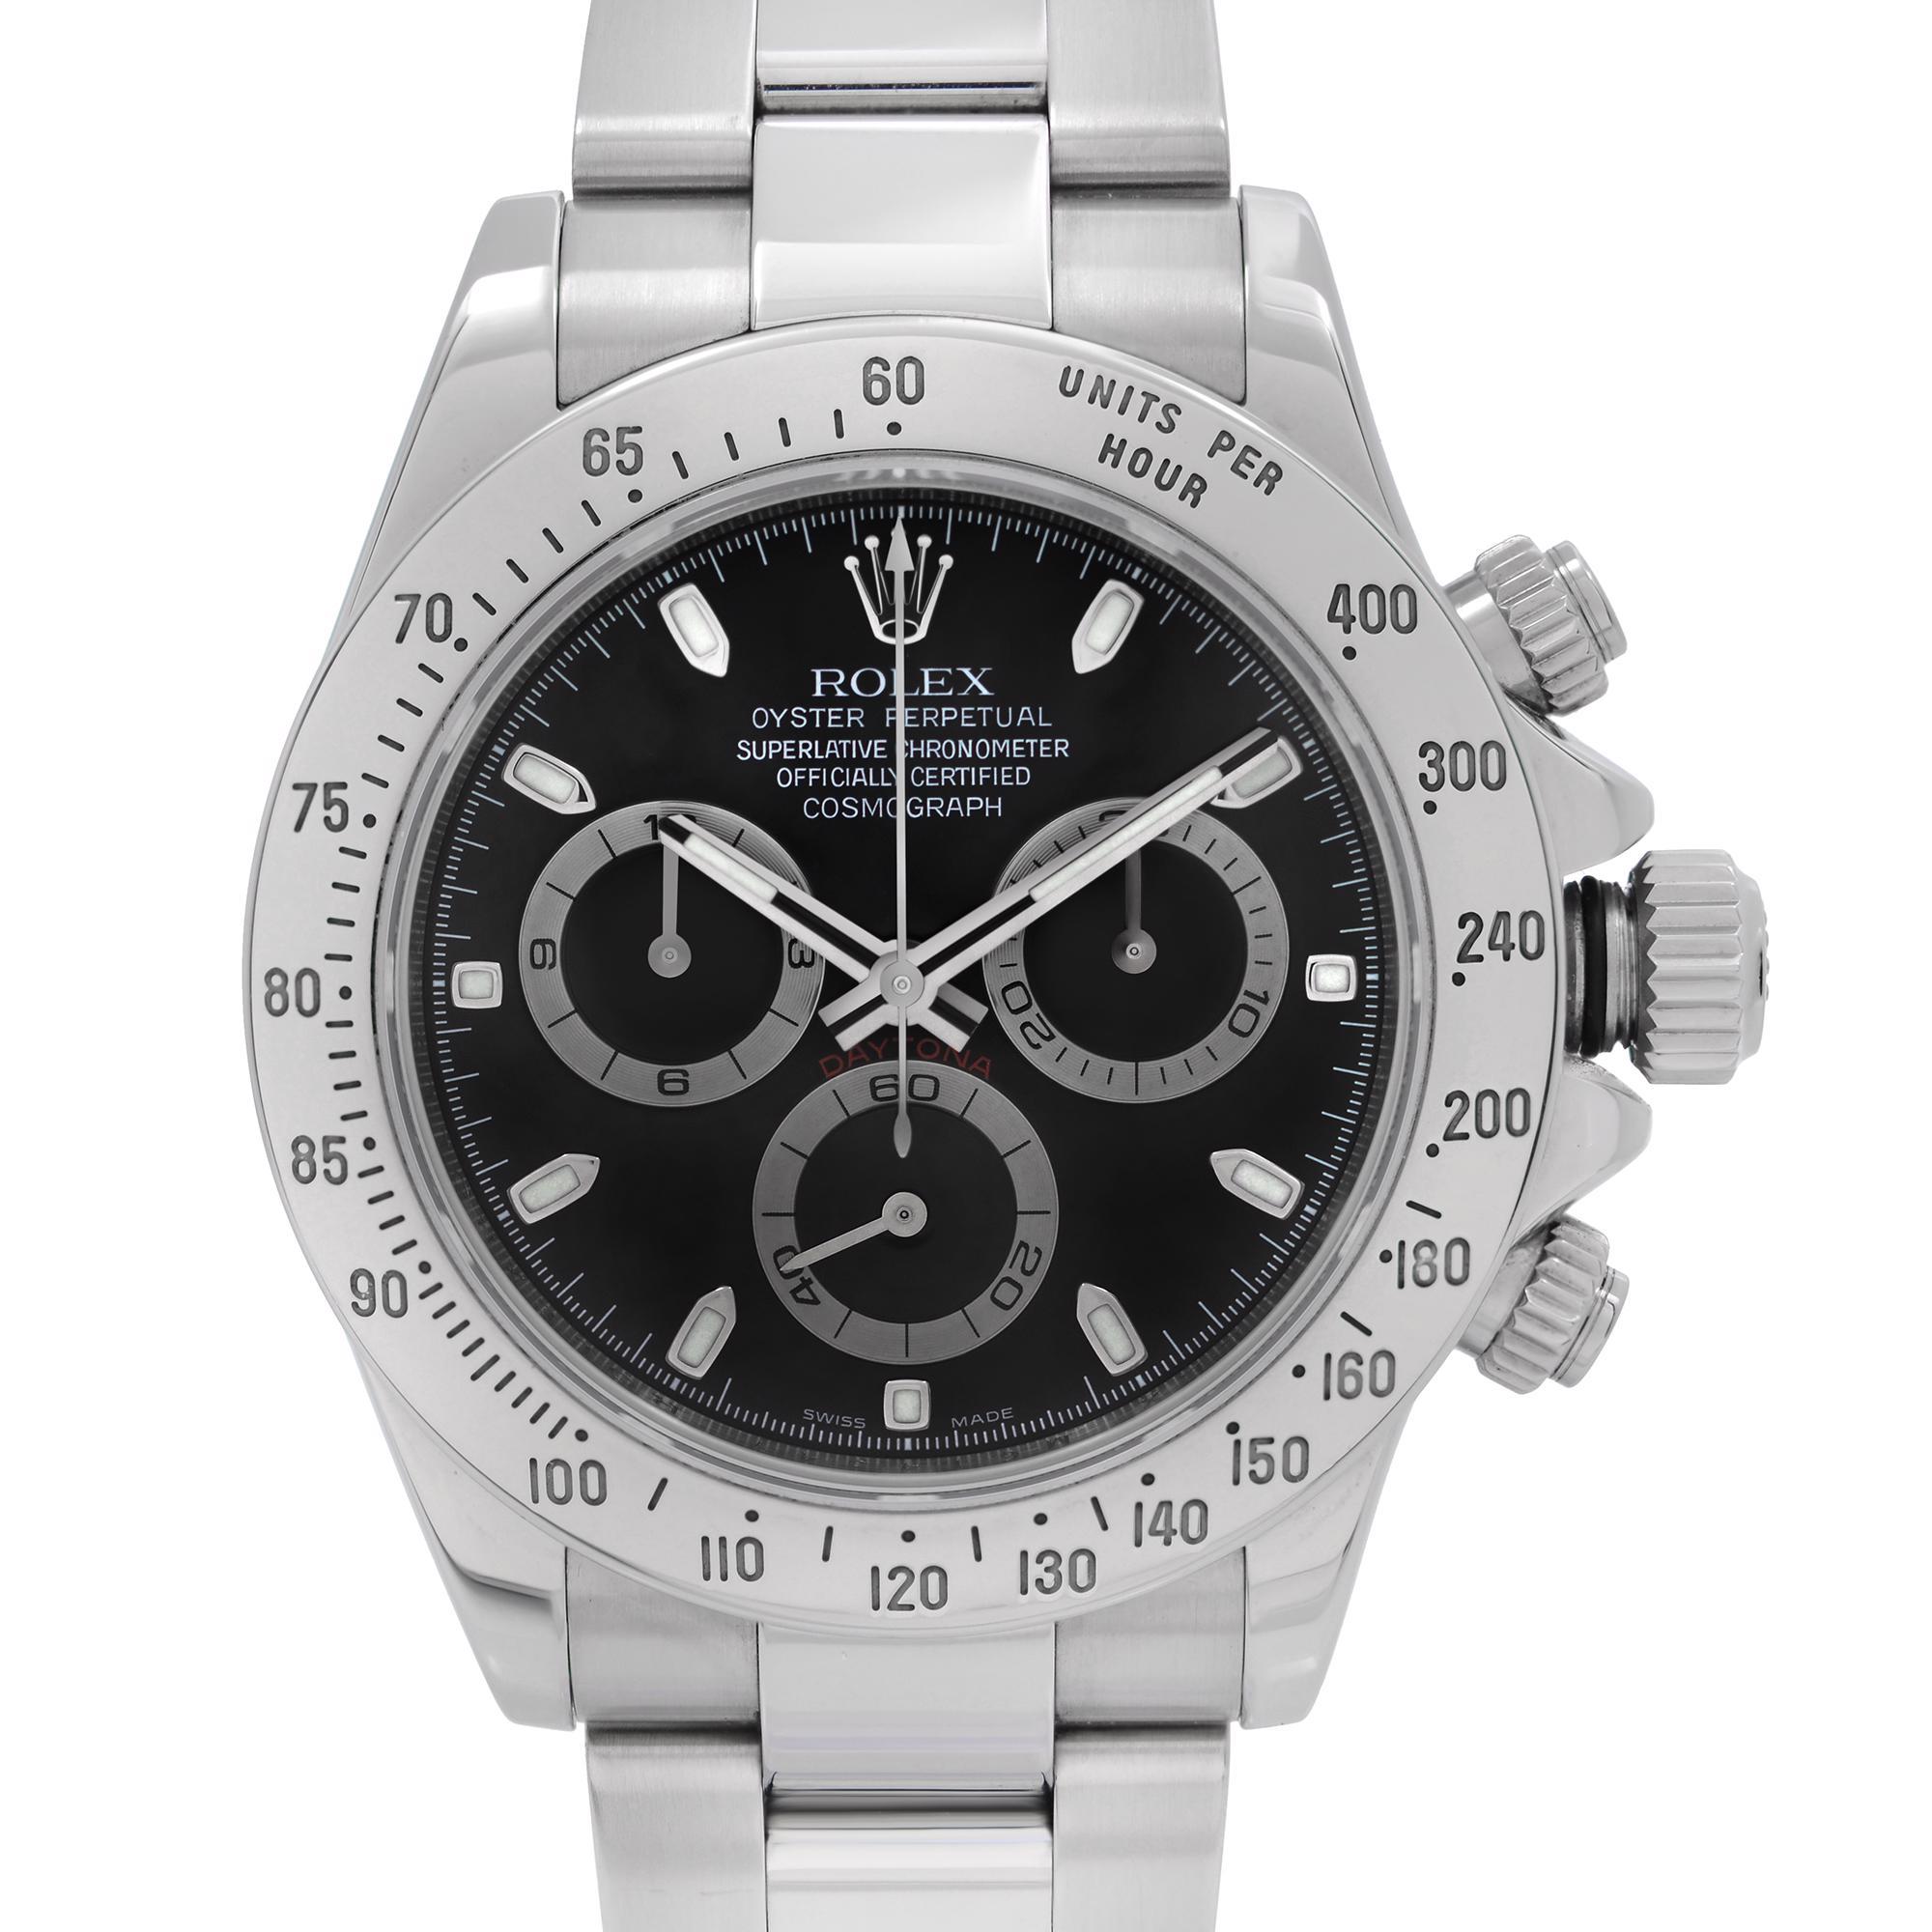 Pre-owned. Comes with the original box and papers.

Details:
Brand Rolex
Type Wristwatch
Department Men
Model Number 116520
Country/Region of Manufacture Switzerland
Style Dress/Formal, Luxury, Sport
Model Rolex Daytona 116520
Movement Mechanical